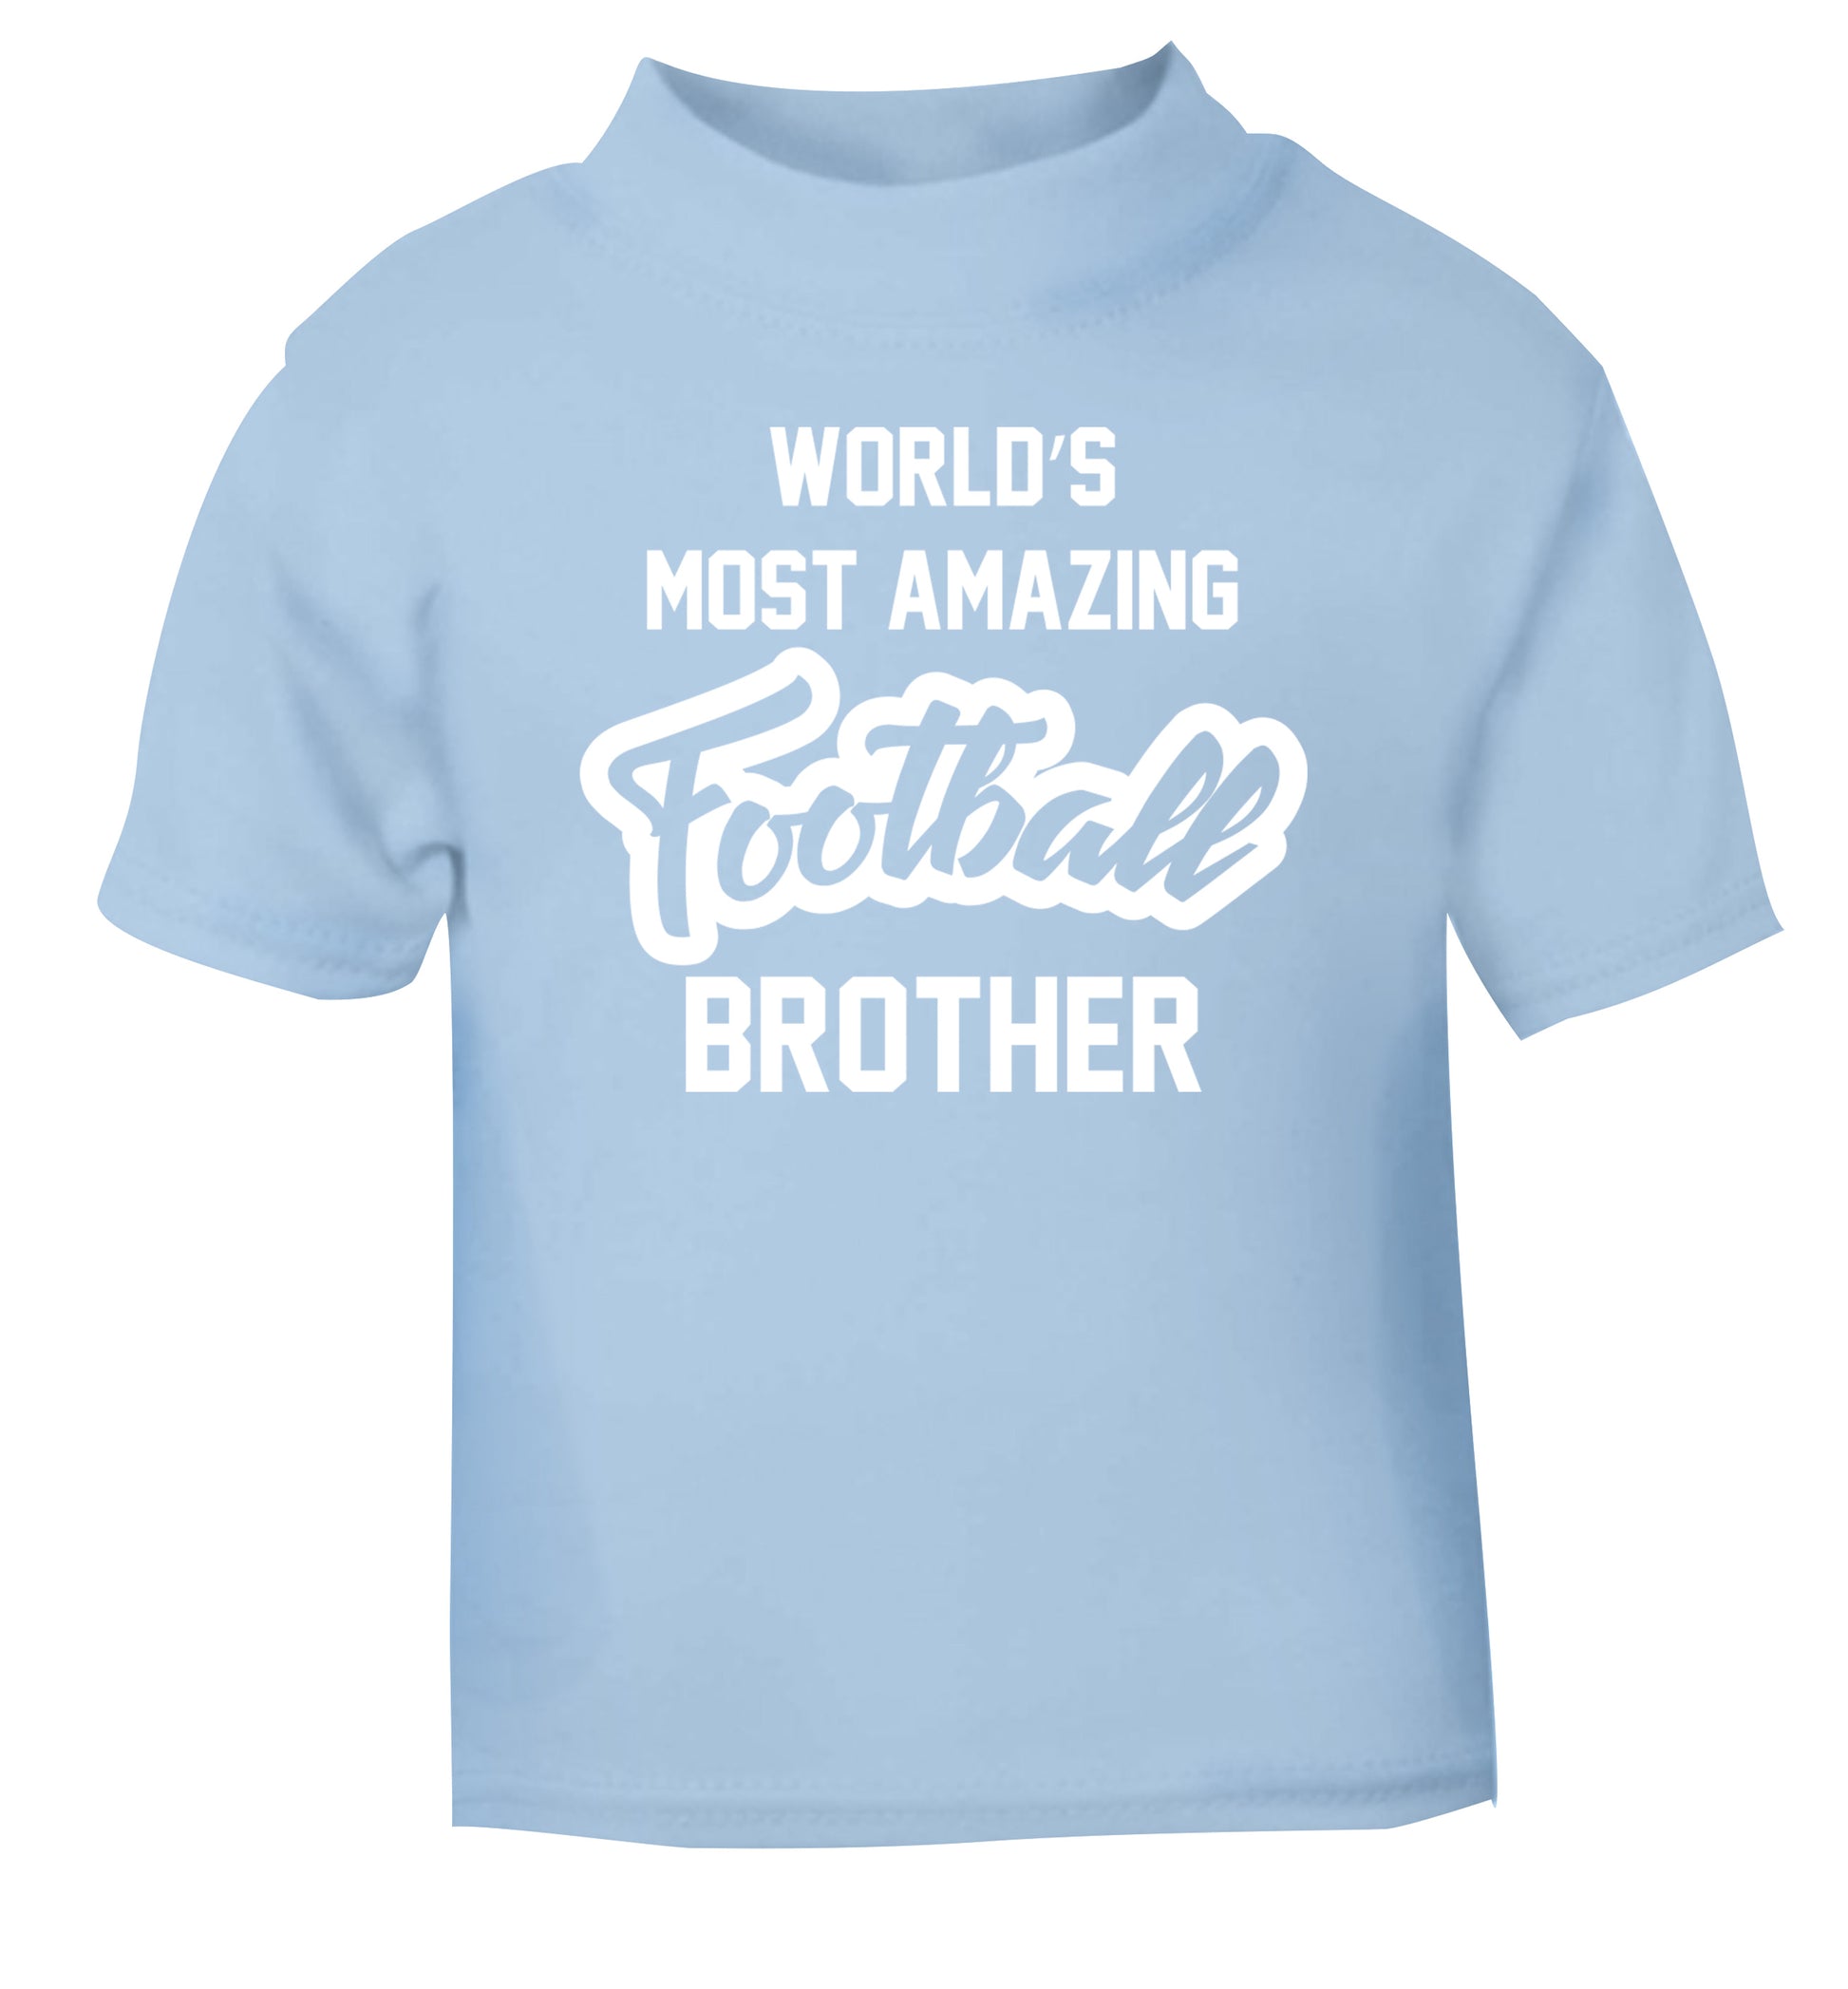 Worlds most amazing football brother light blue Baby Toddler Tshirt 2 Years